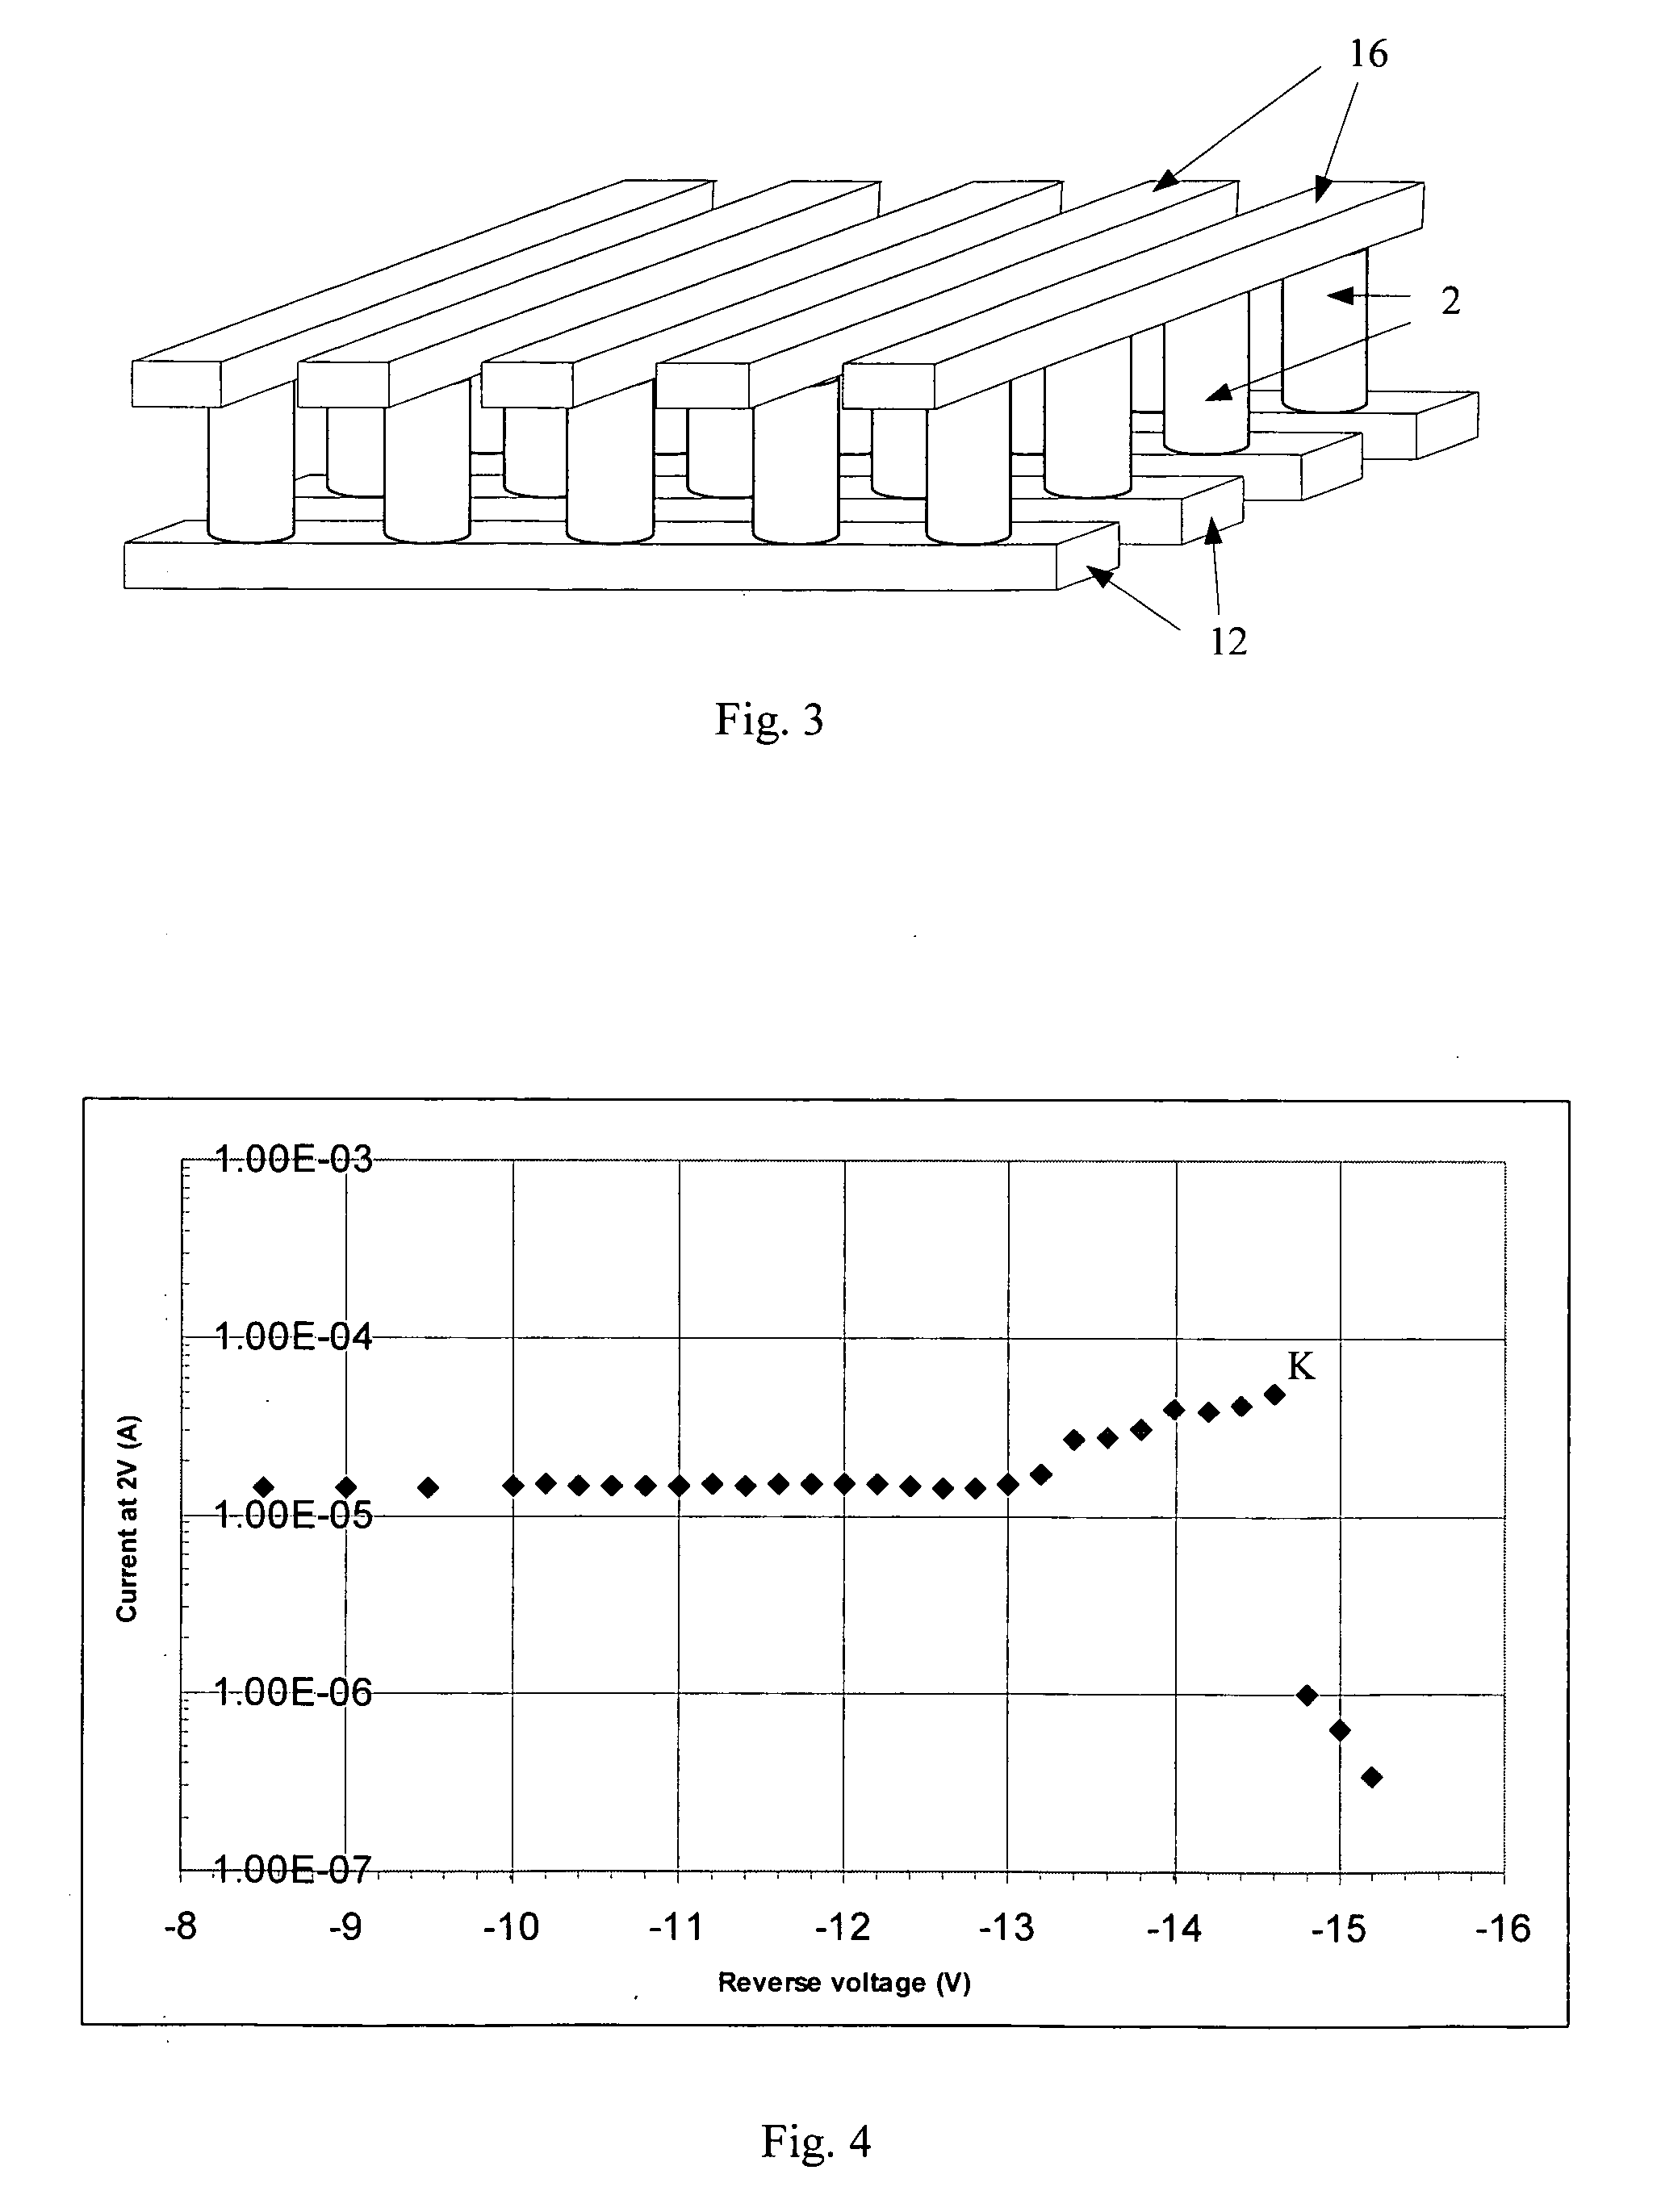 Multi-use memory cell and memory array